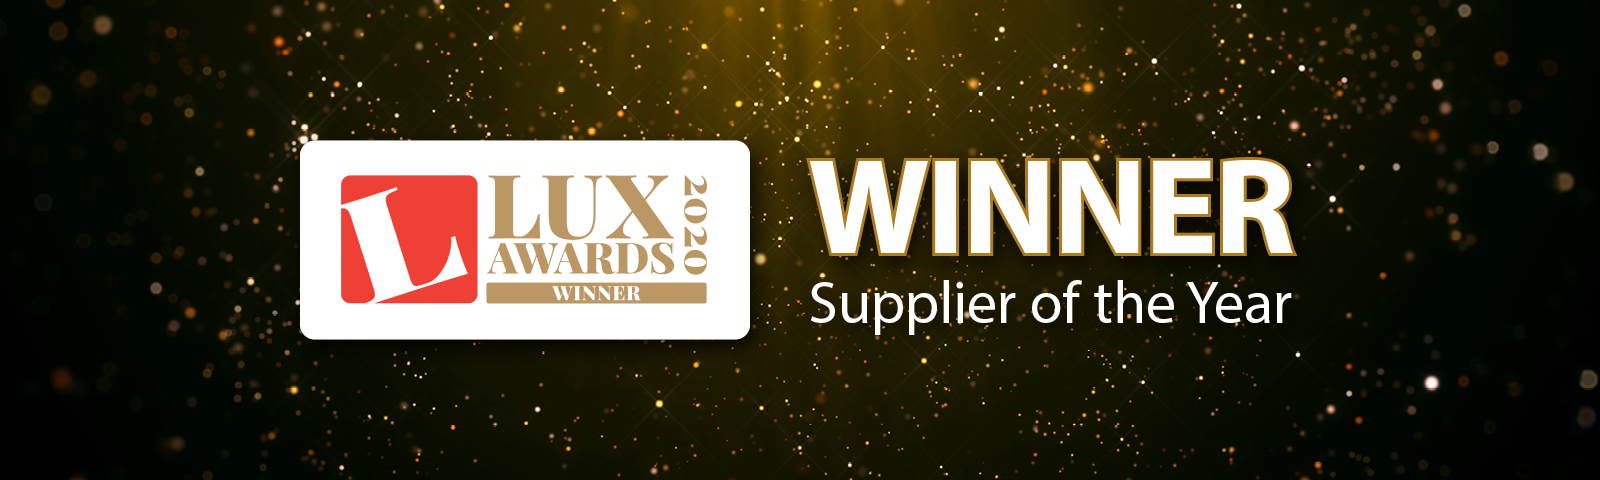 Thorlux celebrates winning Supplier of the Year at the Lux Awards 2020